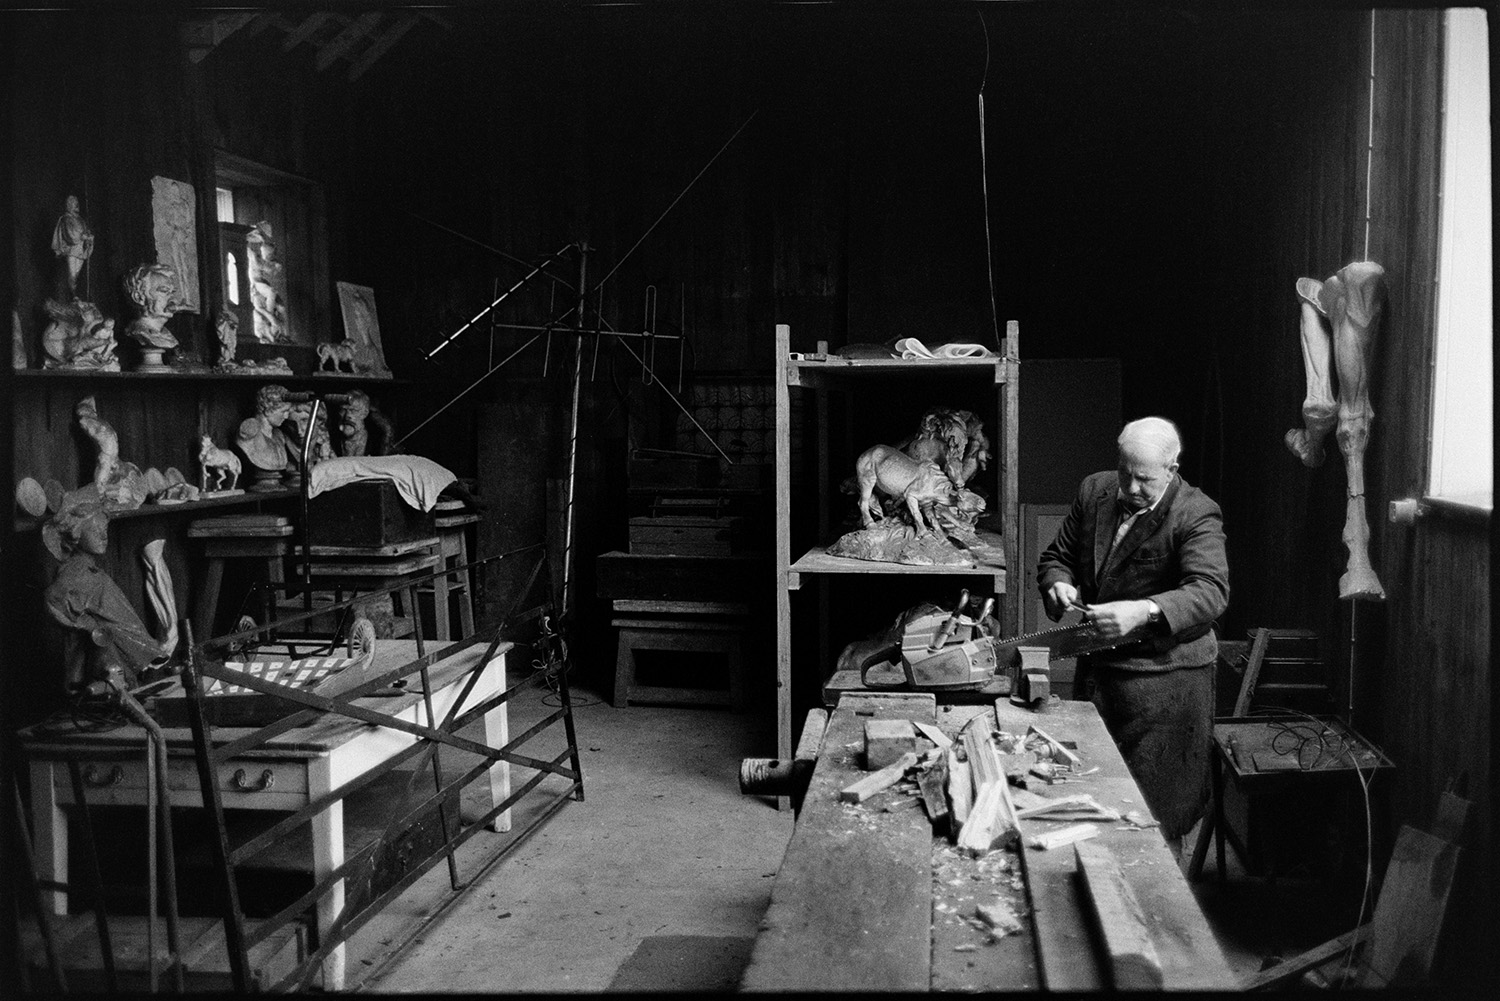 Man sharpening chainsaw in workshop, formerly sculptor's studio, with sculpture.
[Horace Baker sharpening a chainsaw, secured in a vice, in a workshop which was formerly a sculptor's studio, at Halsdon House near Dolton. Pieces of sculpture are displayed, including horses and busts, along with a metal gate.]